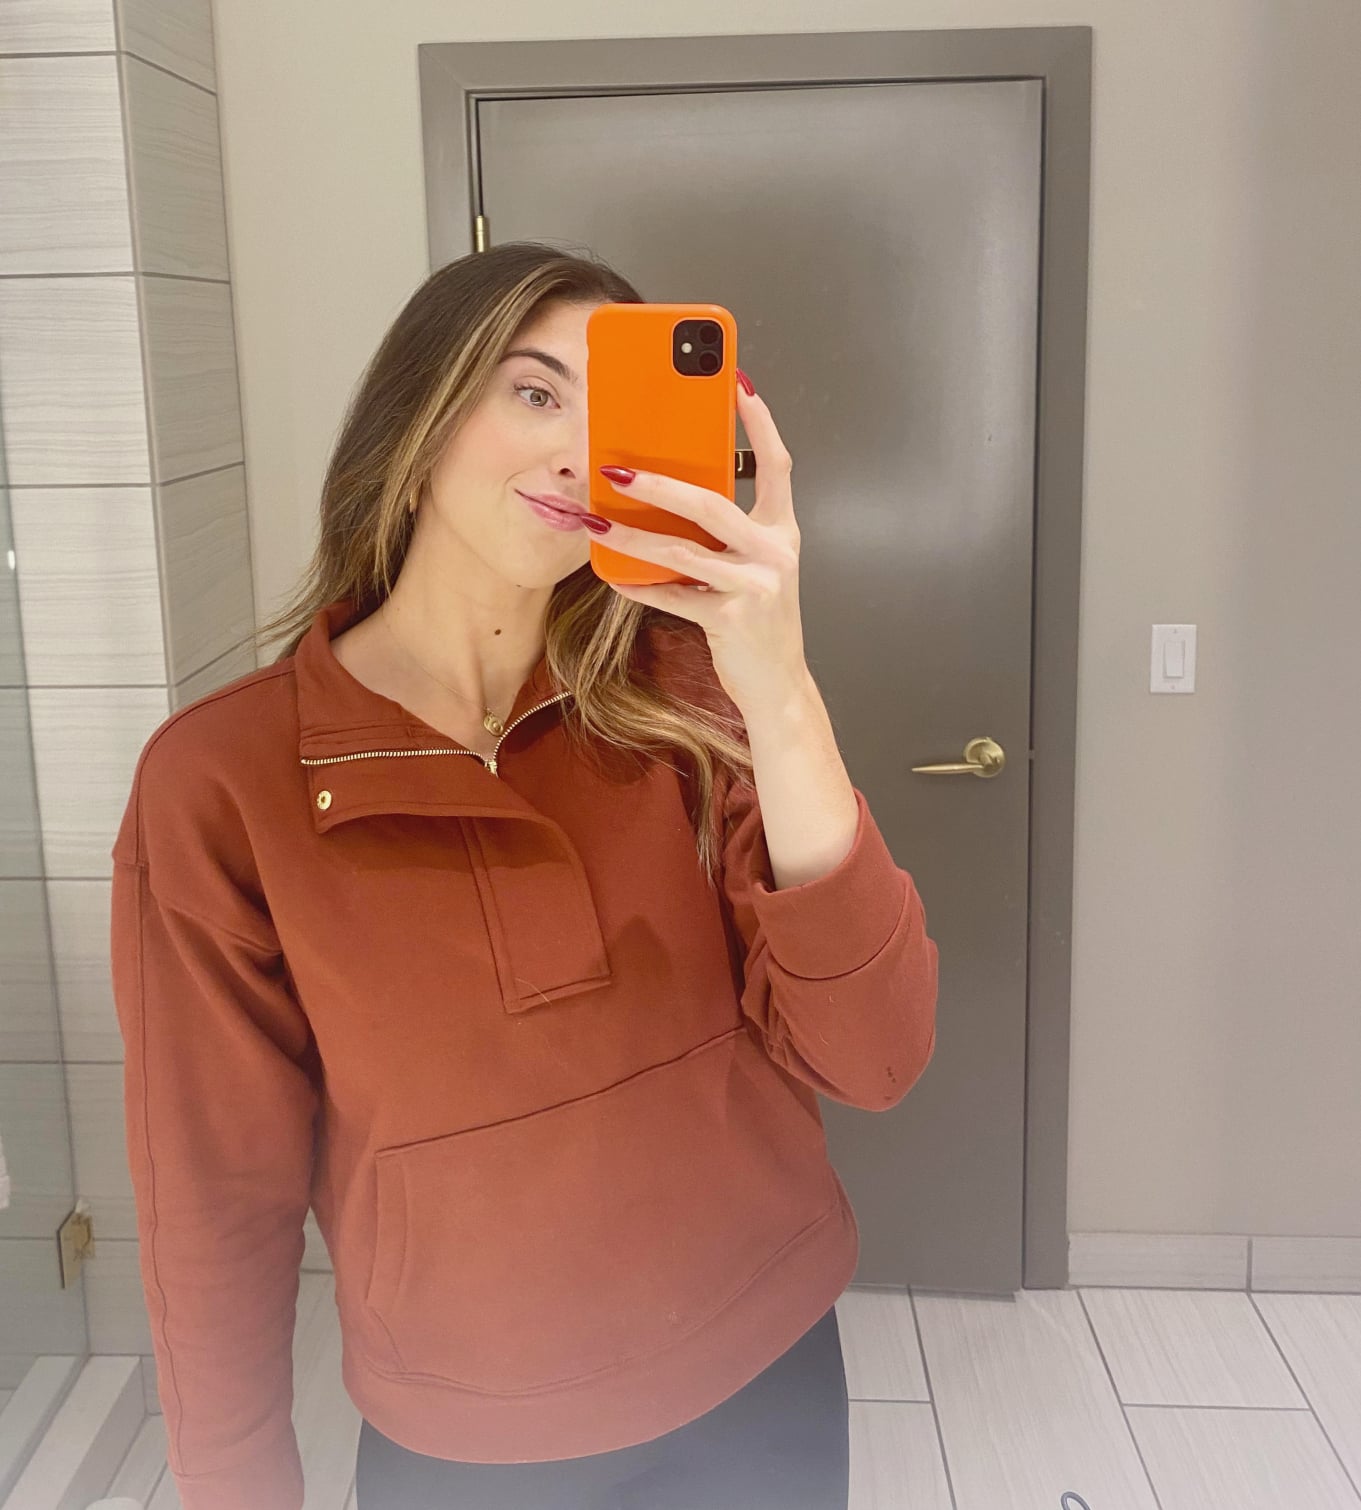 Target Shoppers Are Obsessed With This $25 Quarter-Zip, and So Am I